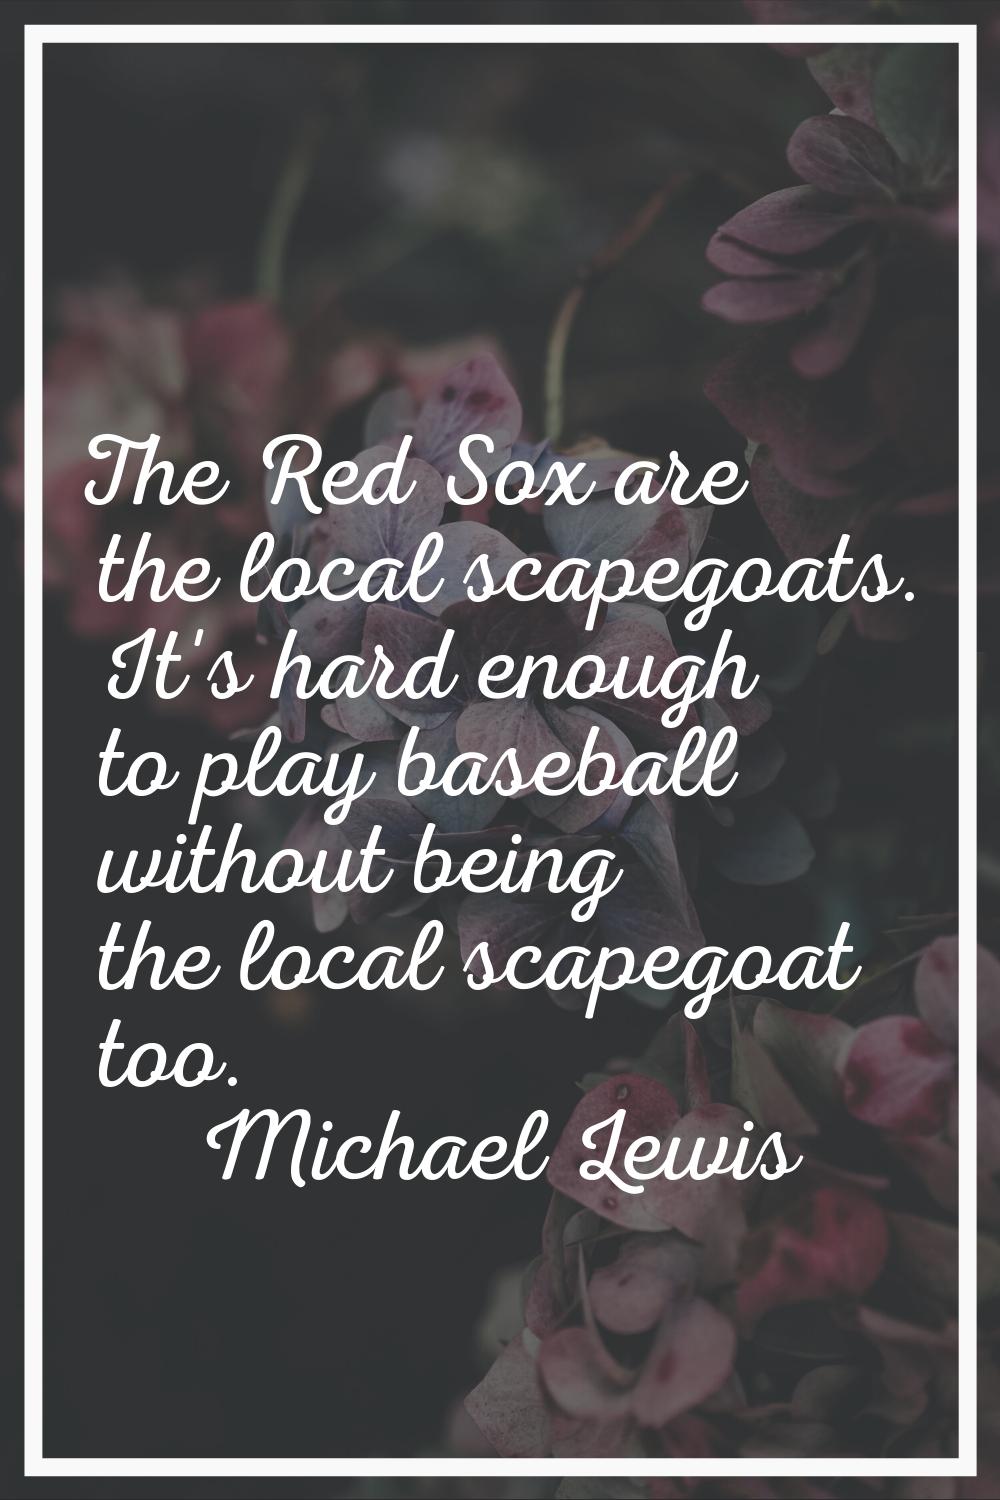 The Red Sox are the local scapegoats. It's hard enough to play baseball without being the local sca